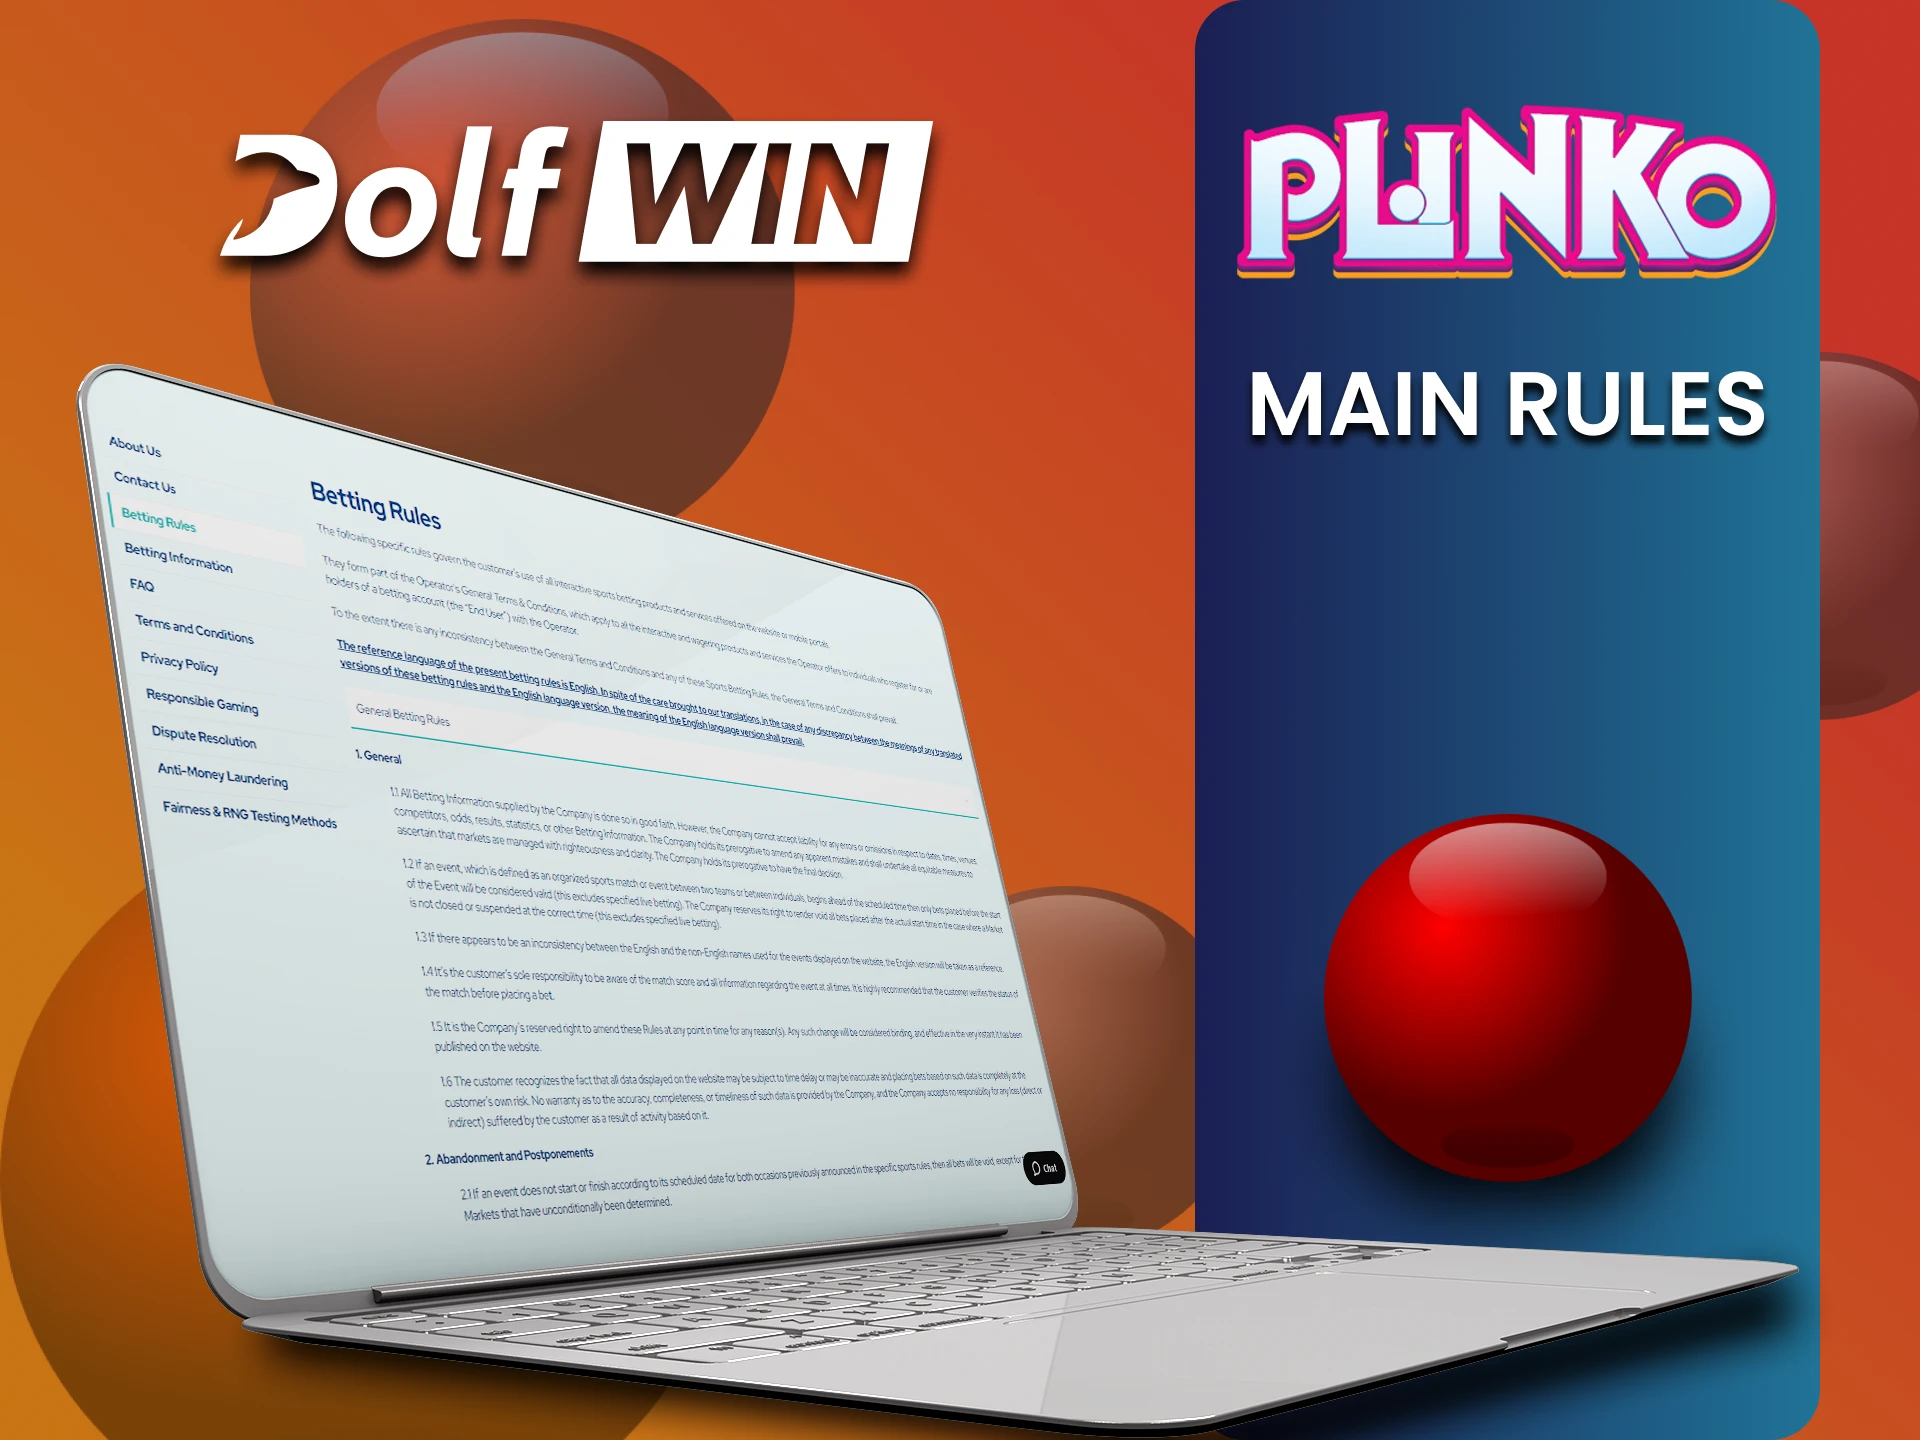 Learn the terms of use on the Dolfwin website for playing Plinko.